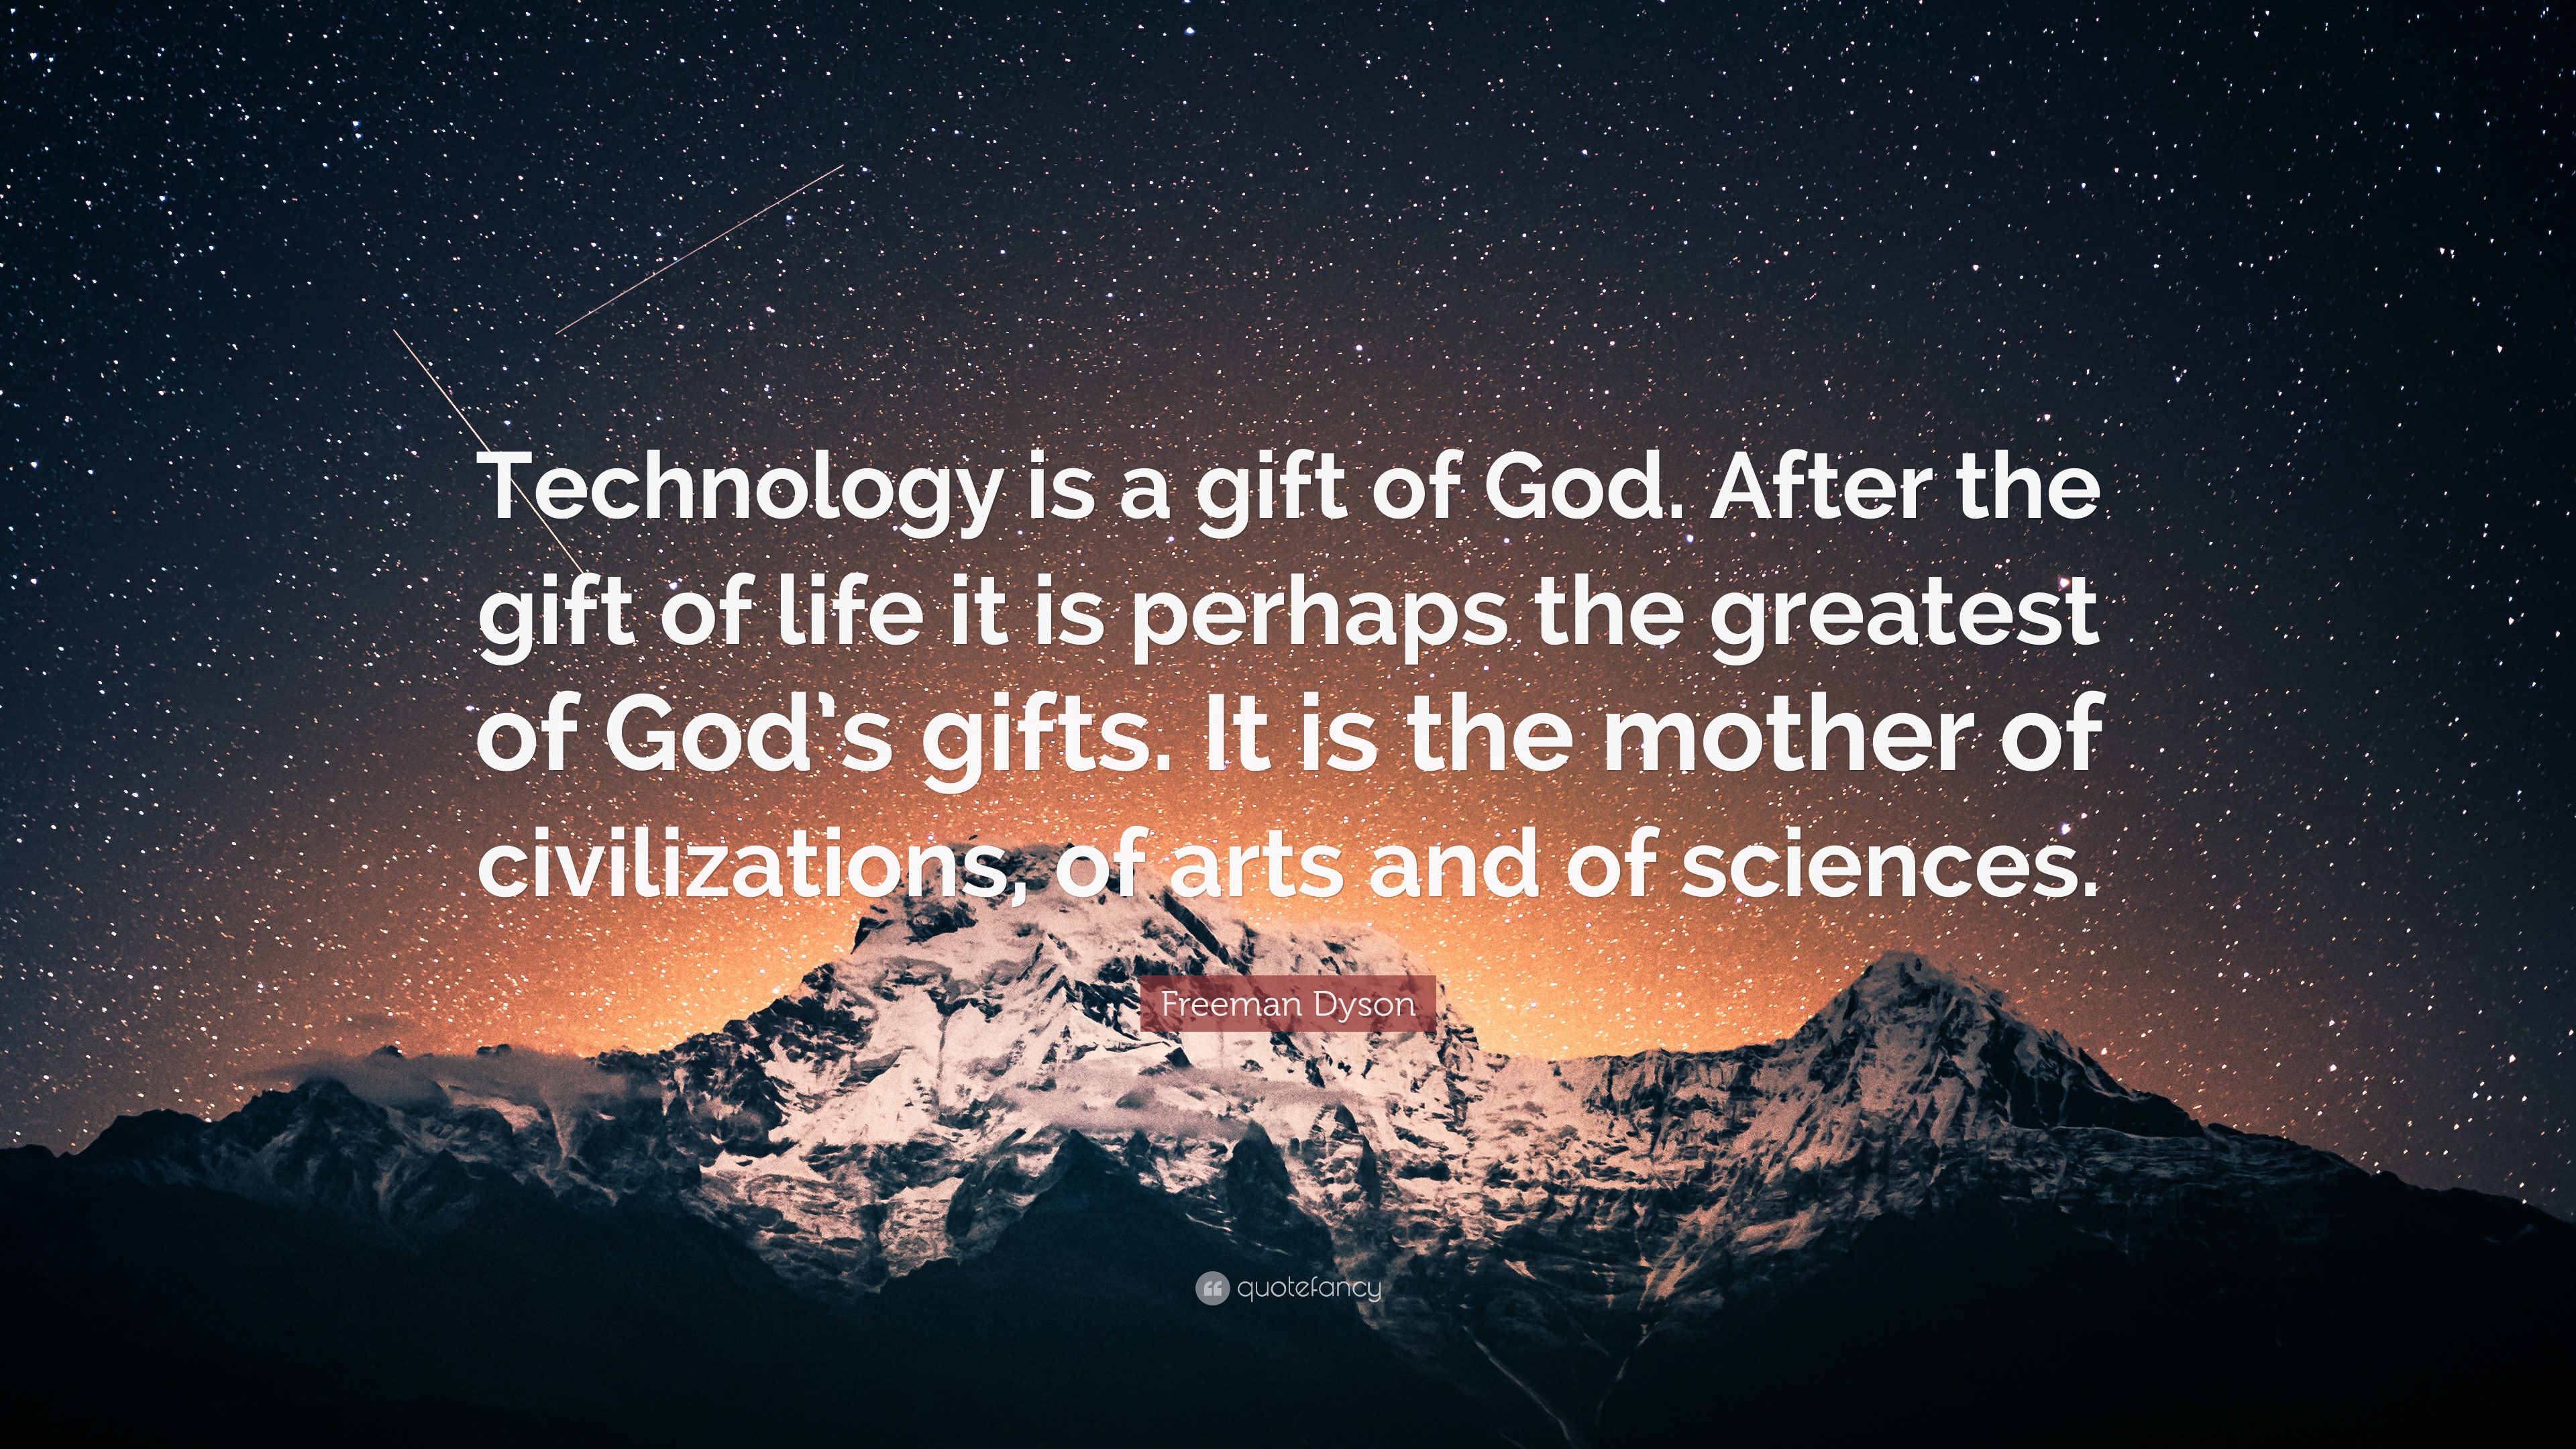 embargo plan lade som om Freeman Dyson Quote: “Technology is a gift of God. After the gift of life  it is perhaps the greatest of God's gifts. It is the mother of civil...”